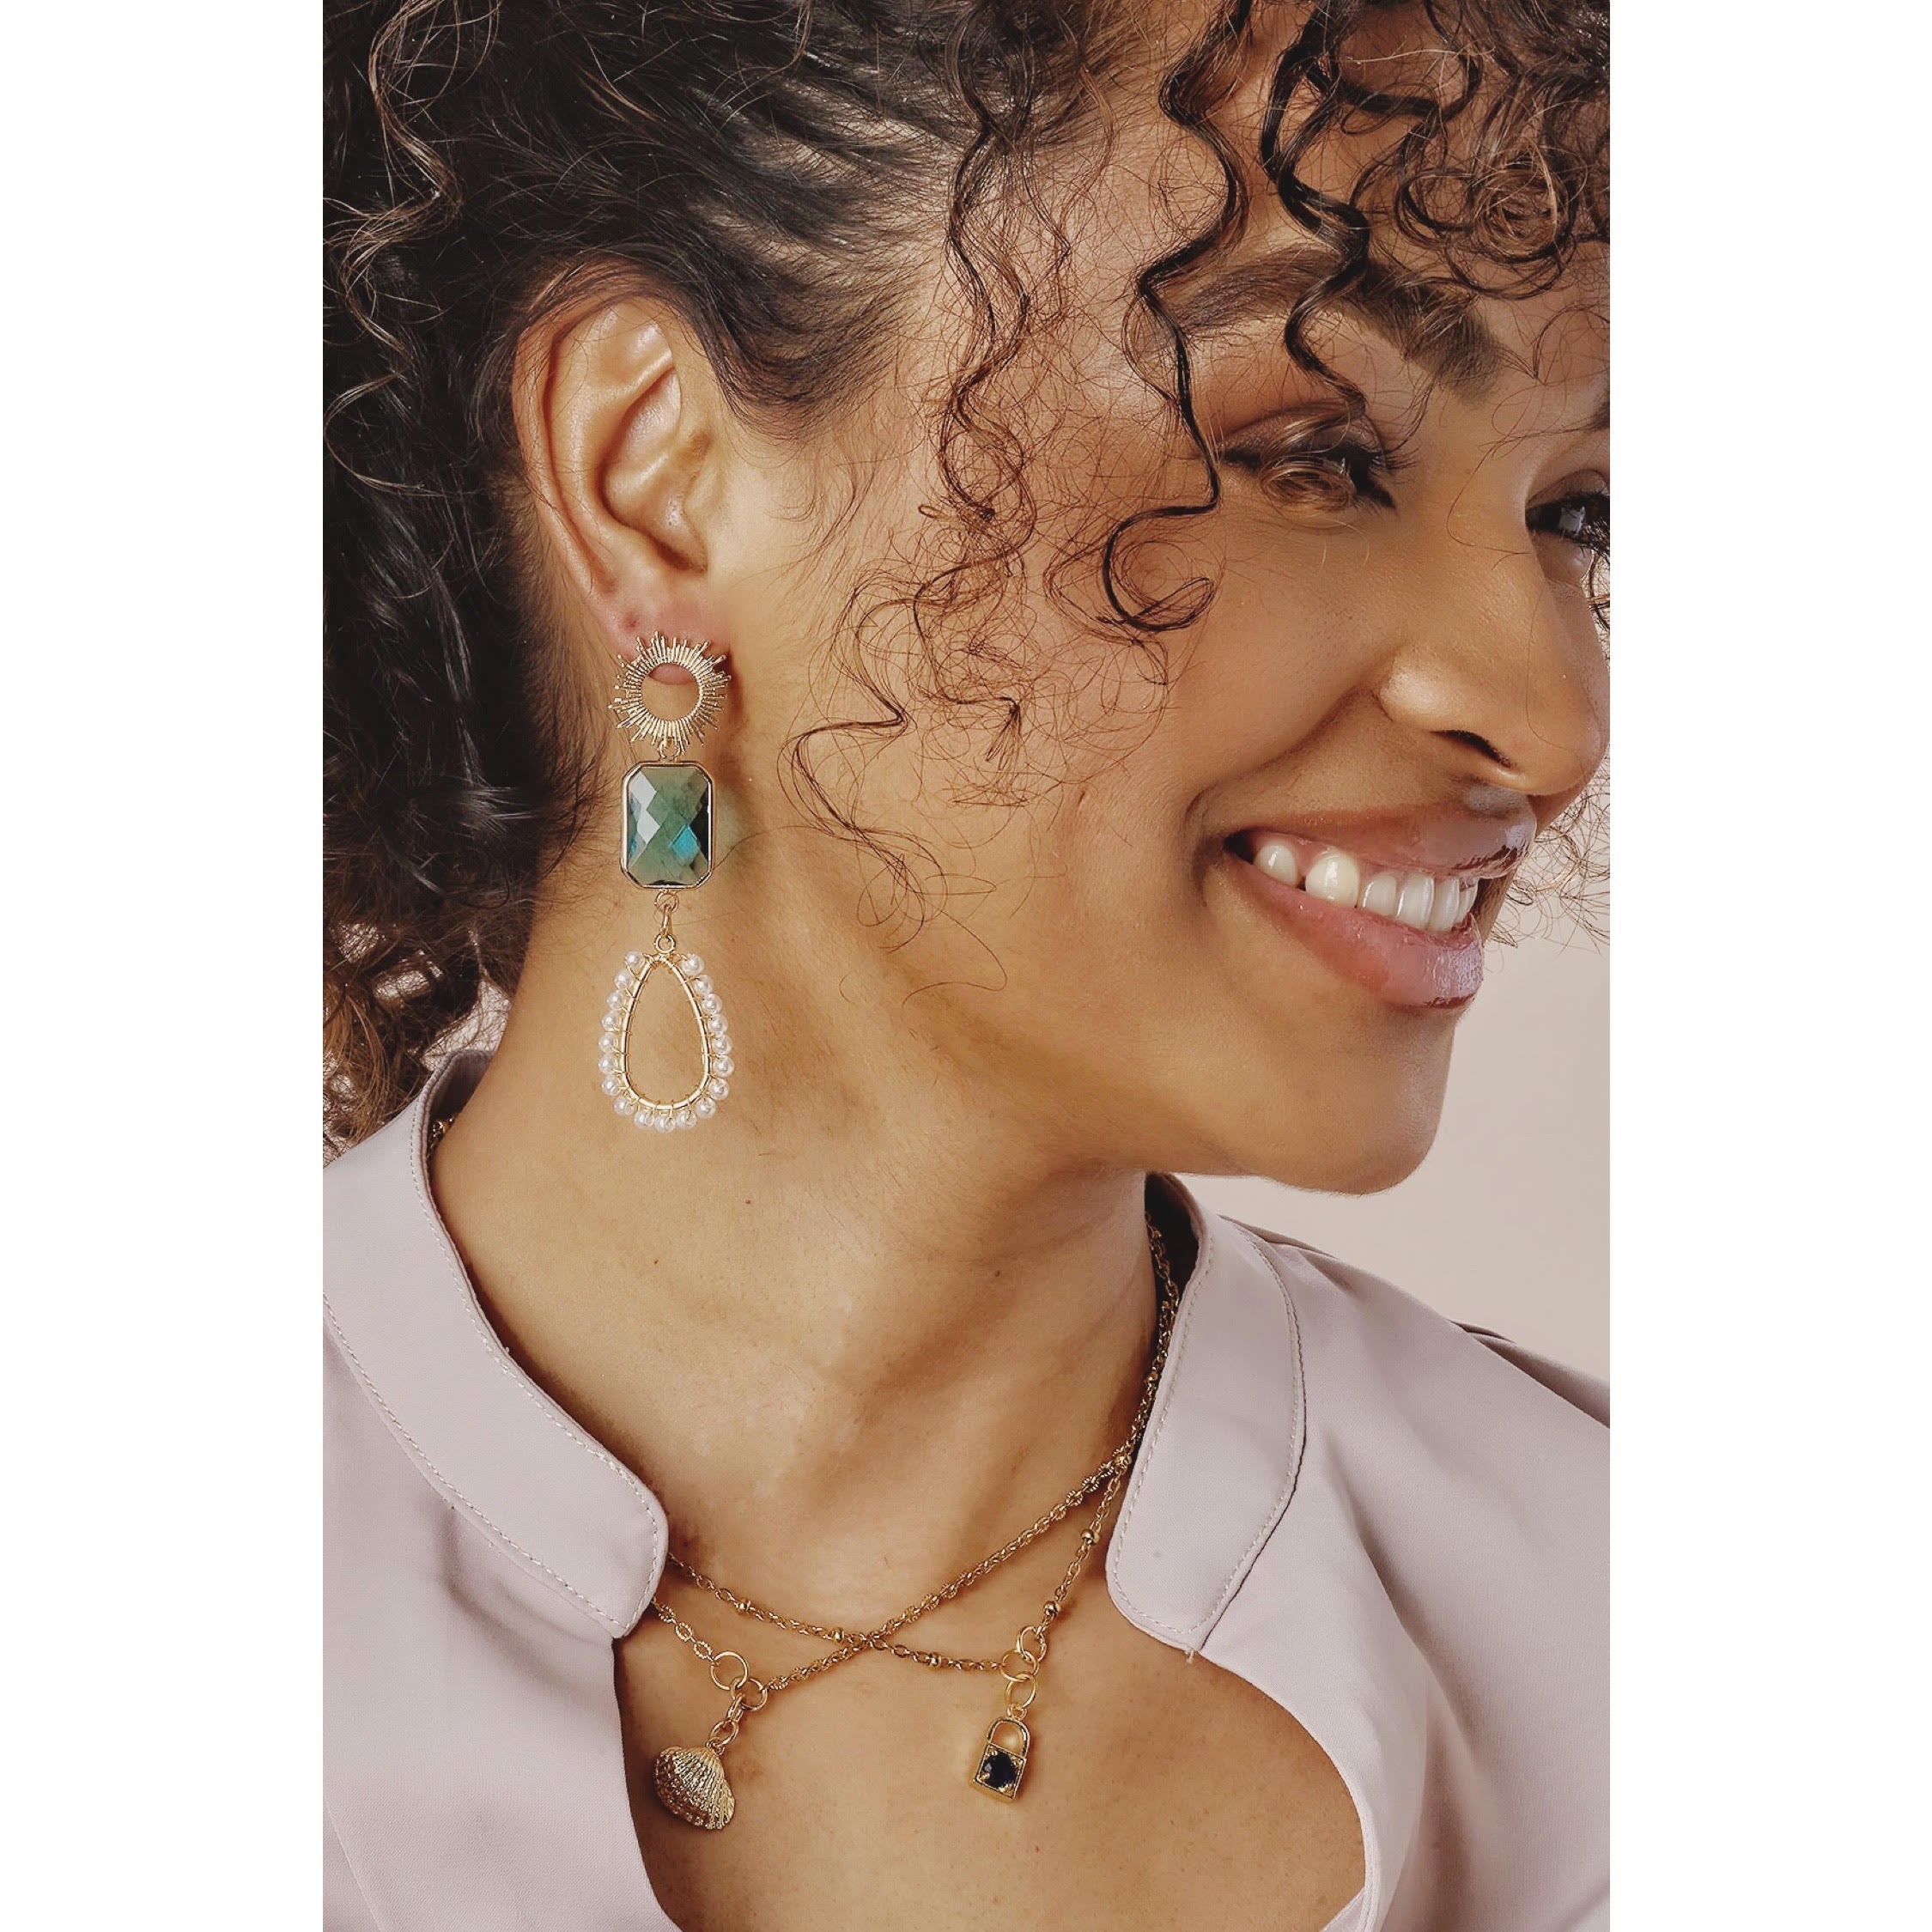 10 Everyday Earrings to Elevate Your Style | Monica Vinader